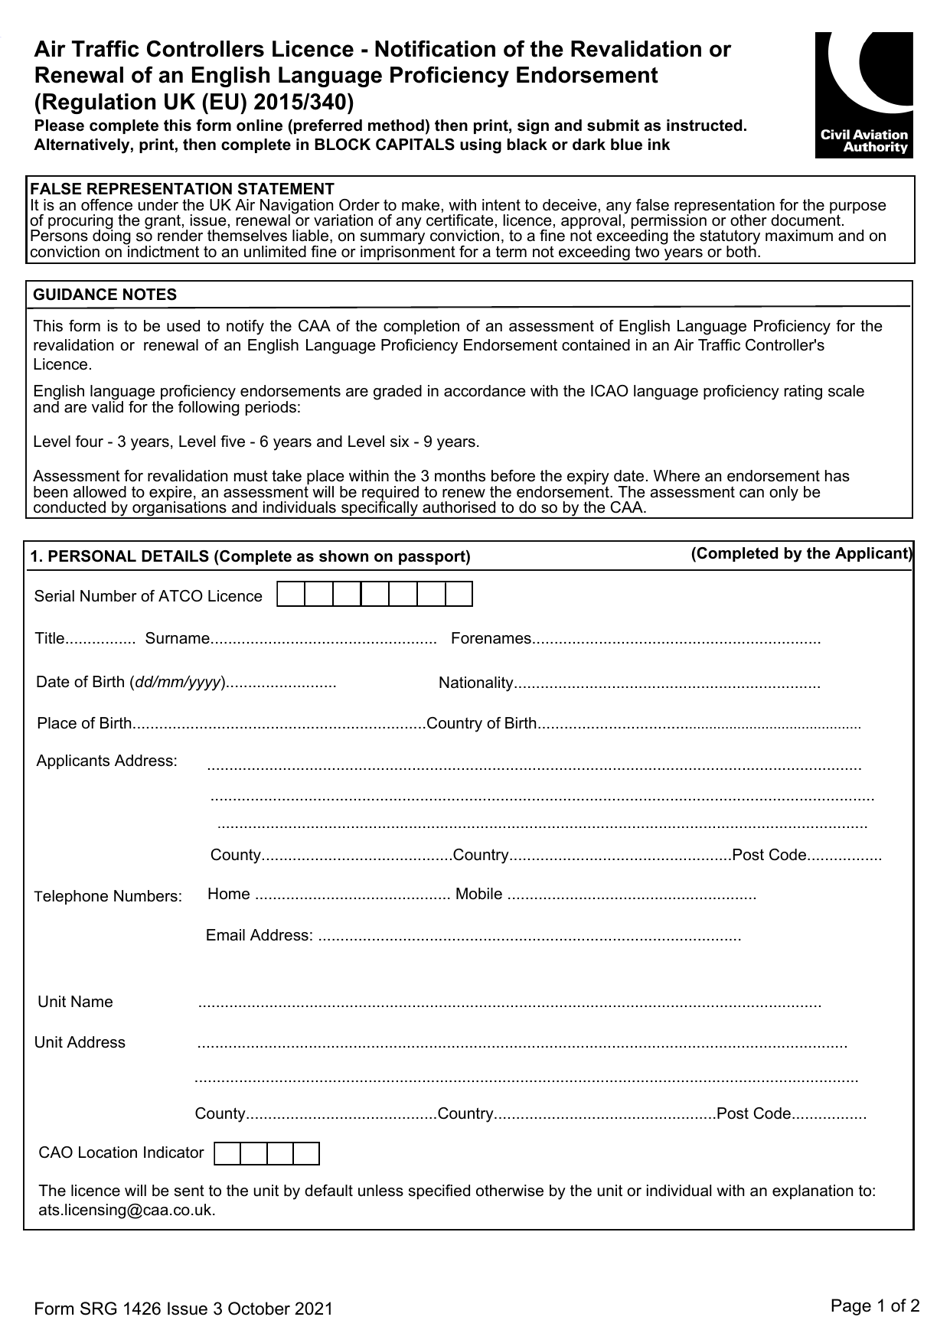 Form SRG1426 Air Traffic Controllers Licence - Notification of the Revalidation or Renewal of an English Language Proficiency Endorsement - United Kingdom, Page 1